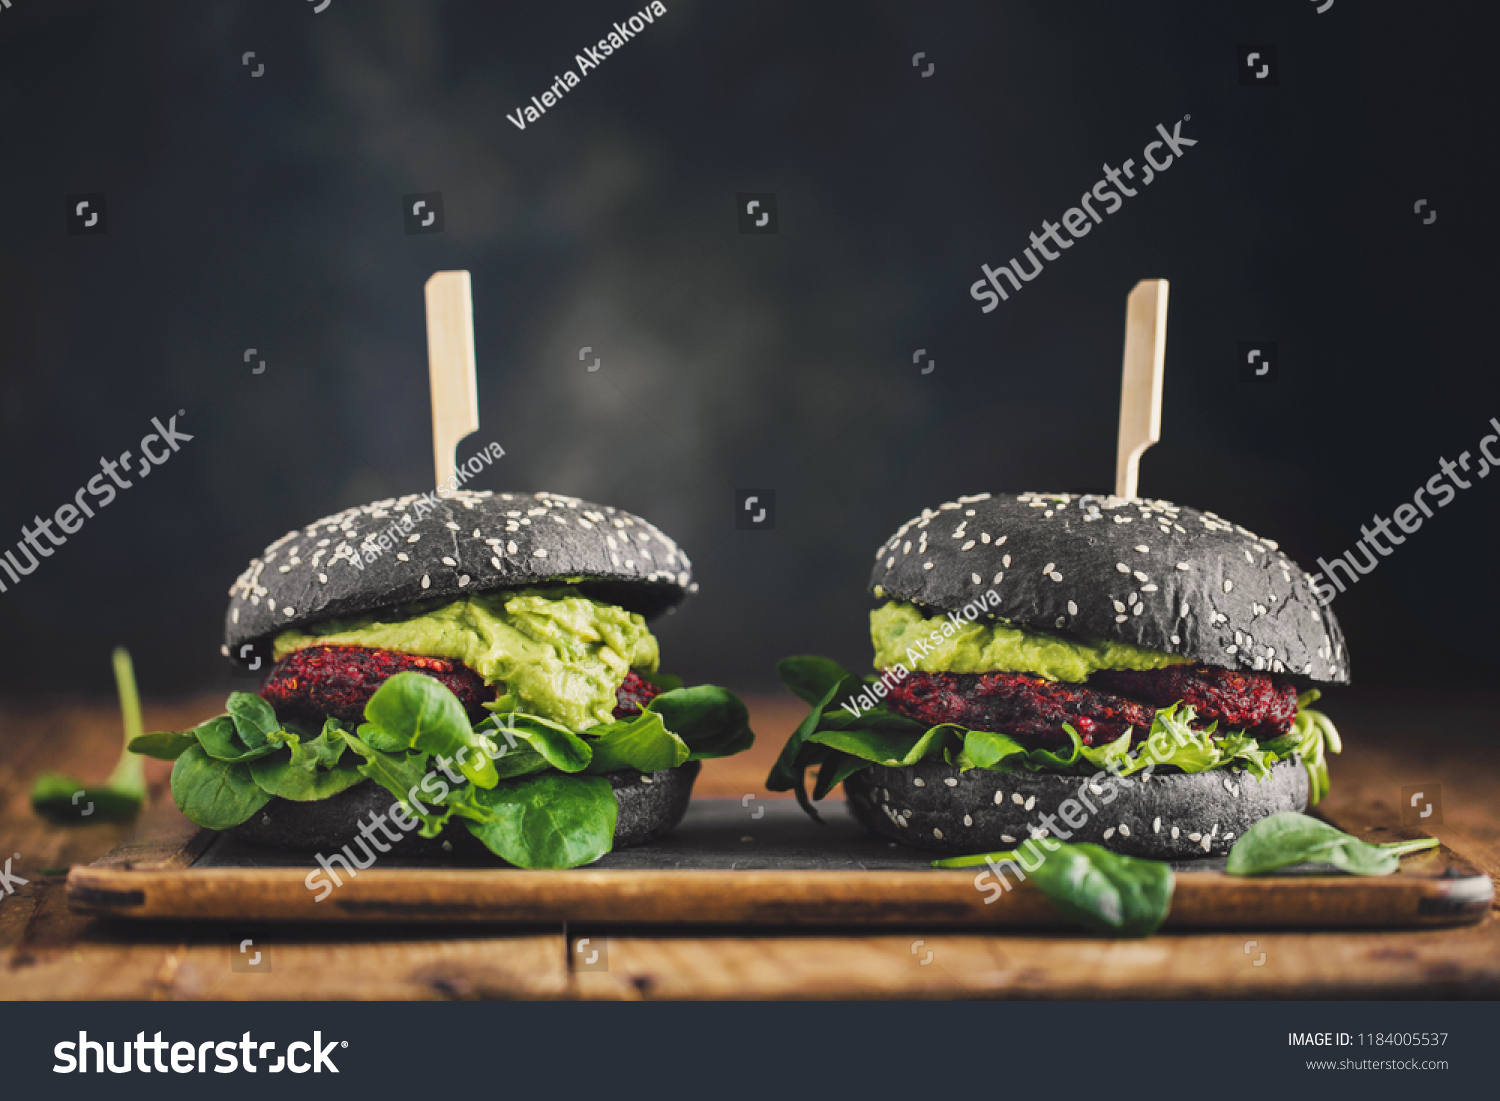 Tasty appetizing healthy vegan black burgers with beetroot, quinoa and avocado sauce served on wooden table. Horizontal with copy space. Concept of healthy food, clean eating #1184005537